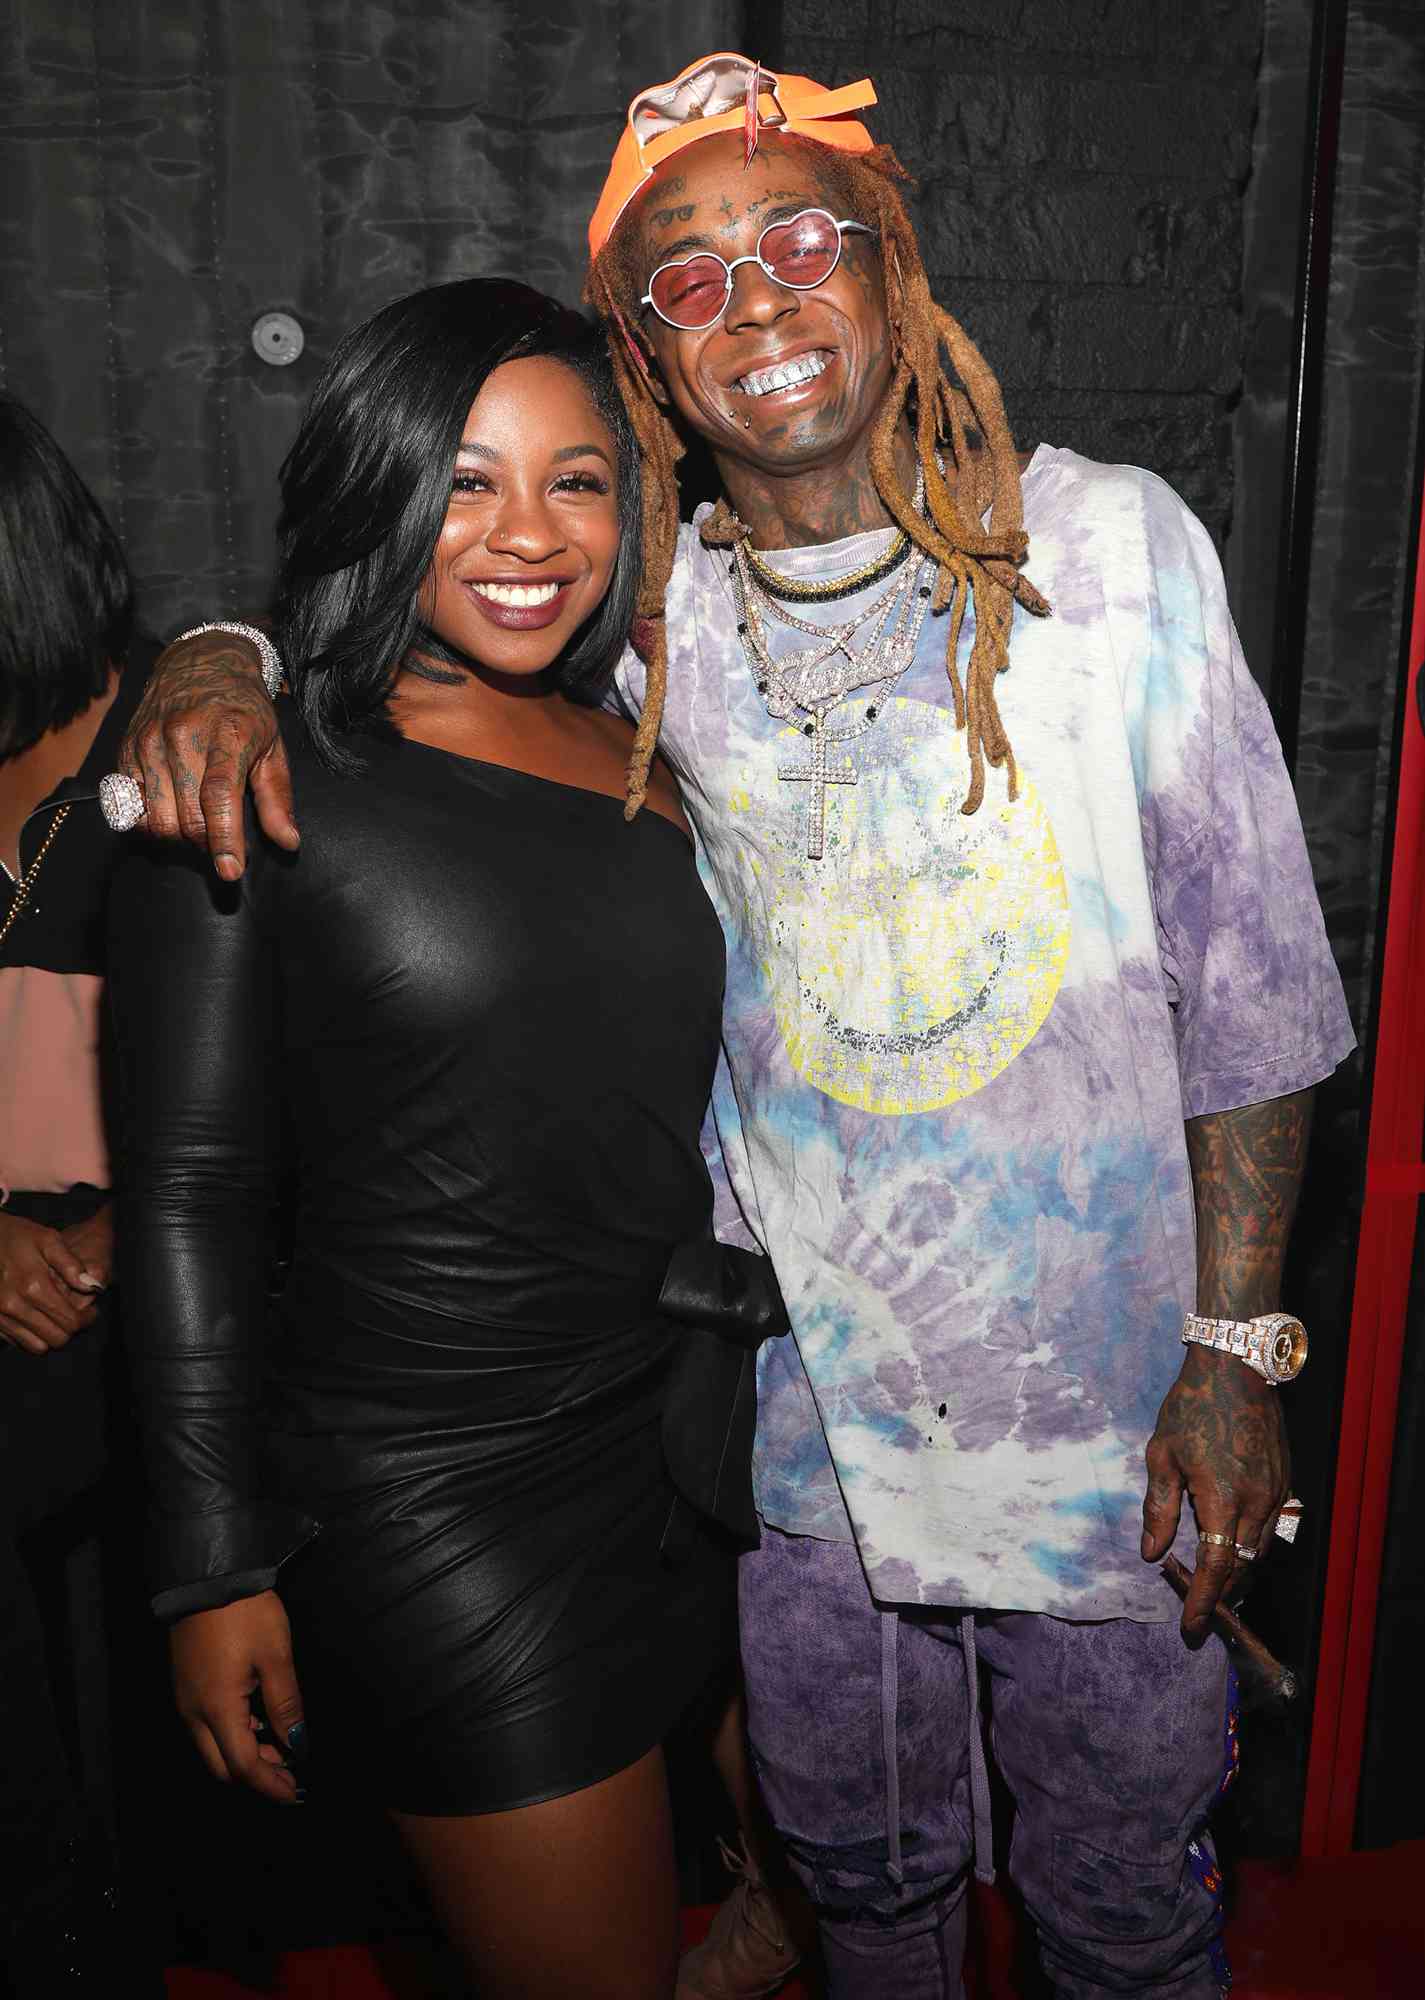 Reginae Carter and Lil Wayne attend Lil Wayne's 36th birthday party and Carter V release at HUBBLE on September 28, 2018 in Los Angeles, California